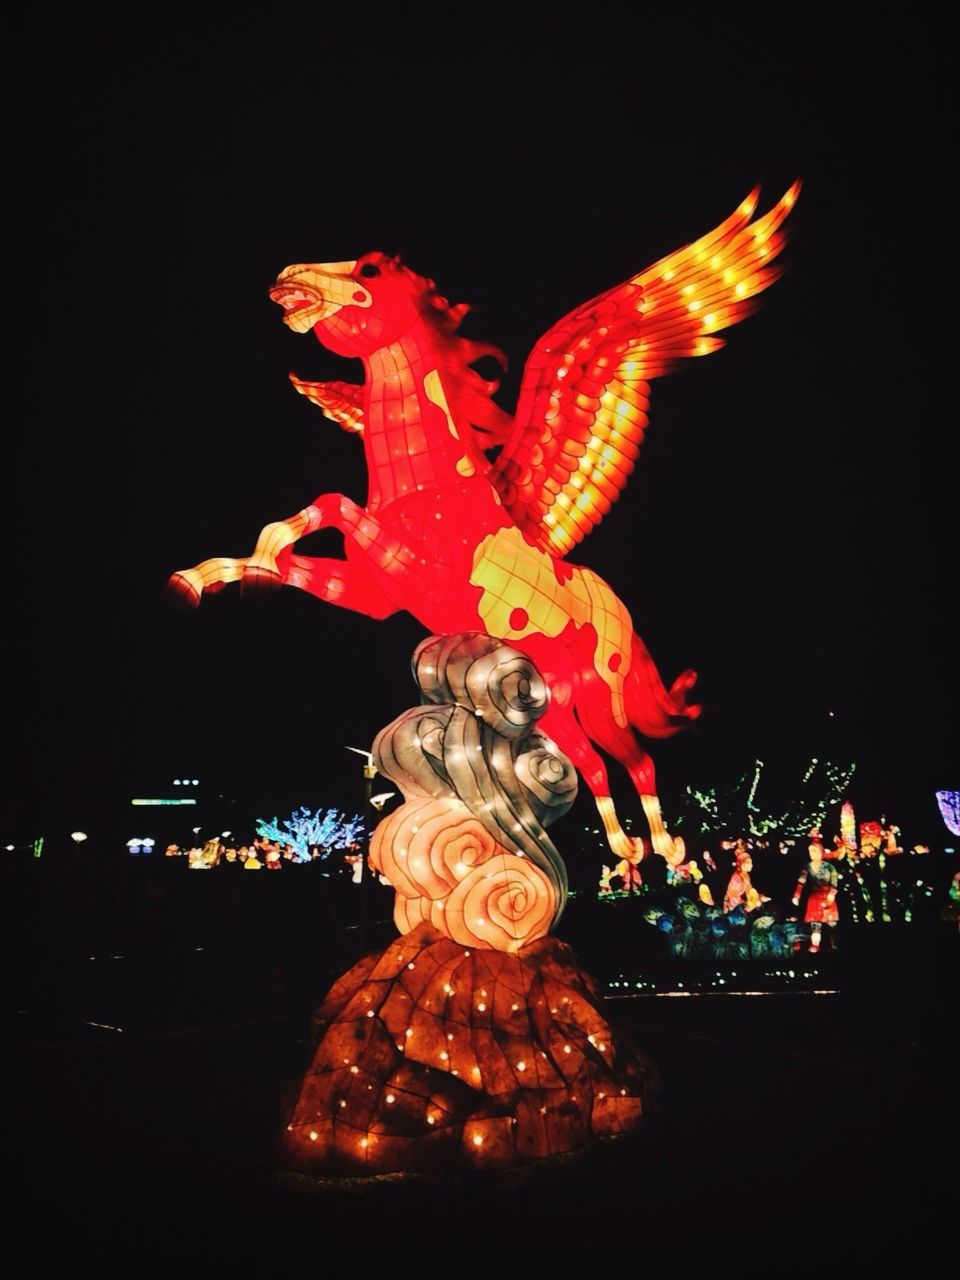 illuminated, night, sculpture, art and craft, statue, art, animal representation, creativity, human representation, decoration, celebration, no people, christmas, gold colored, christmas decoration, tradition, motion, low angle view, outdoors